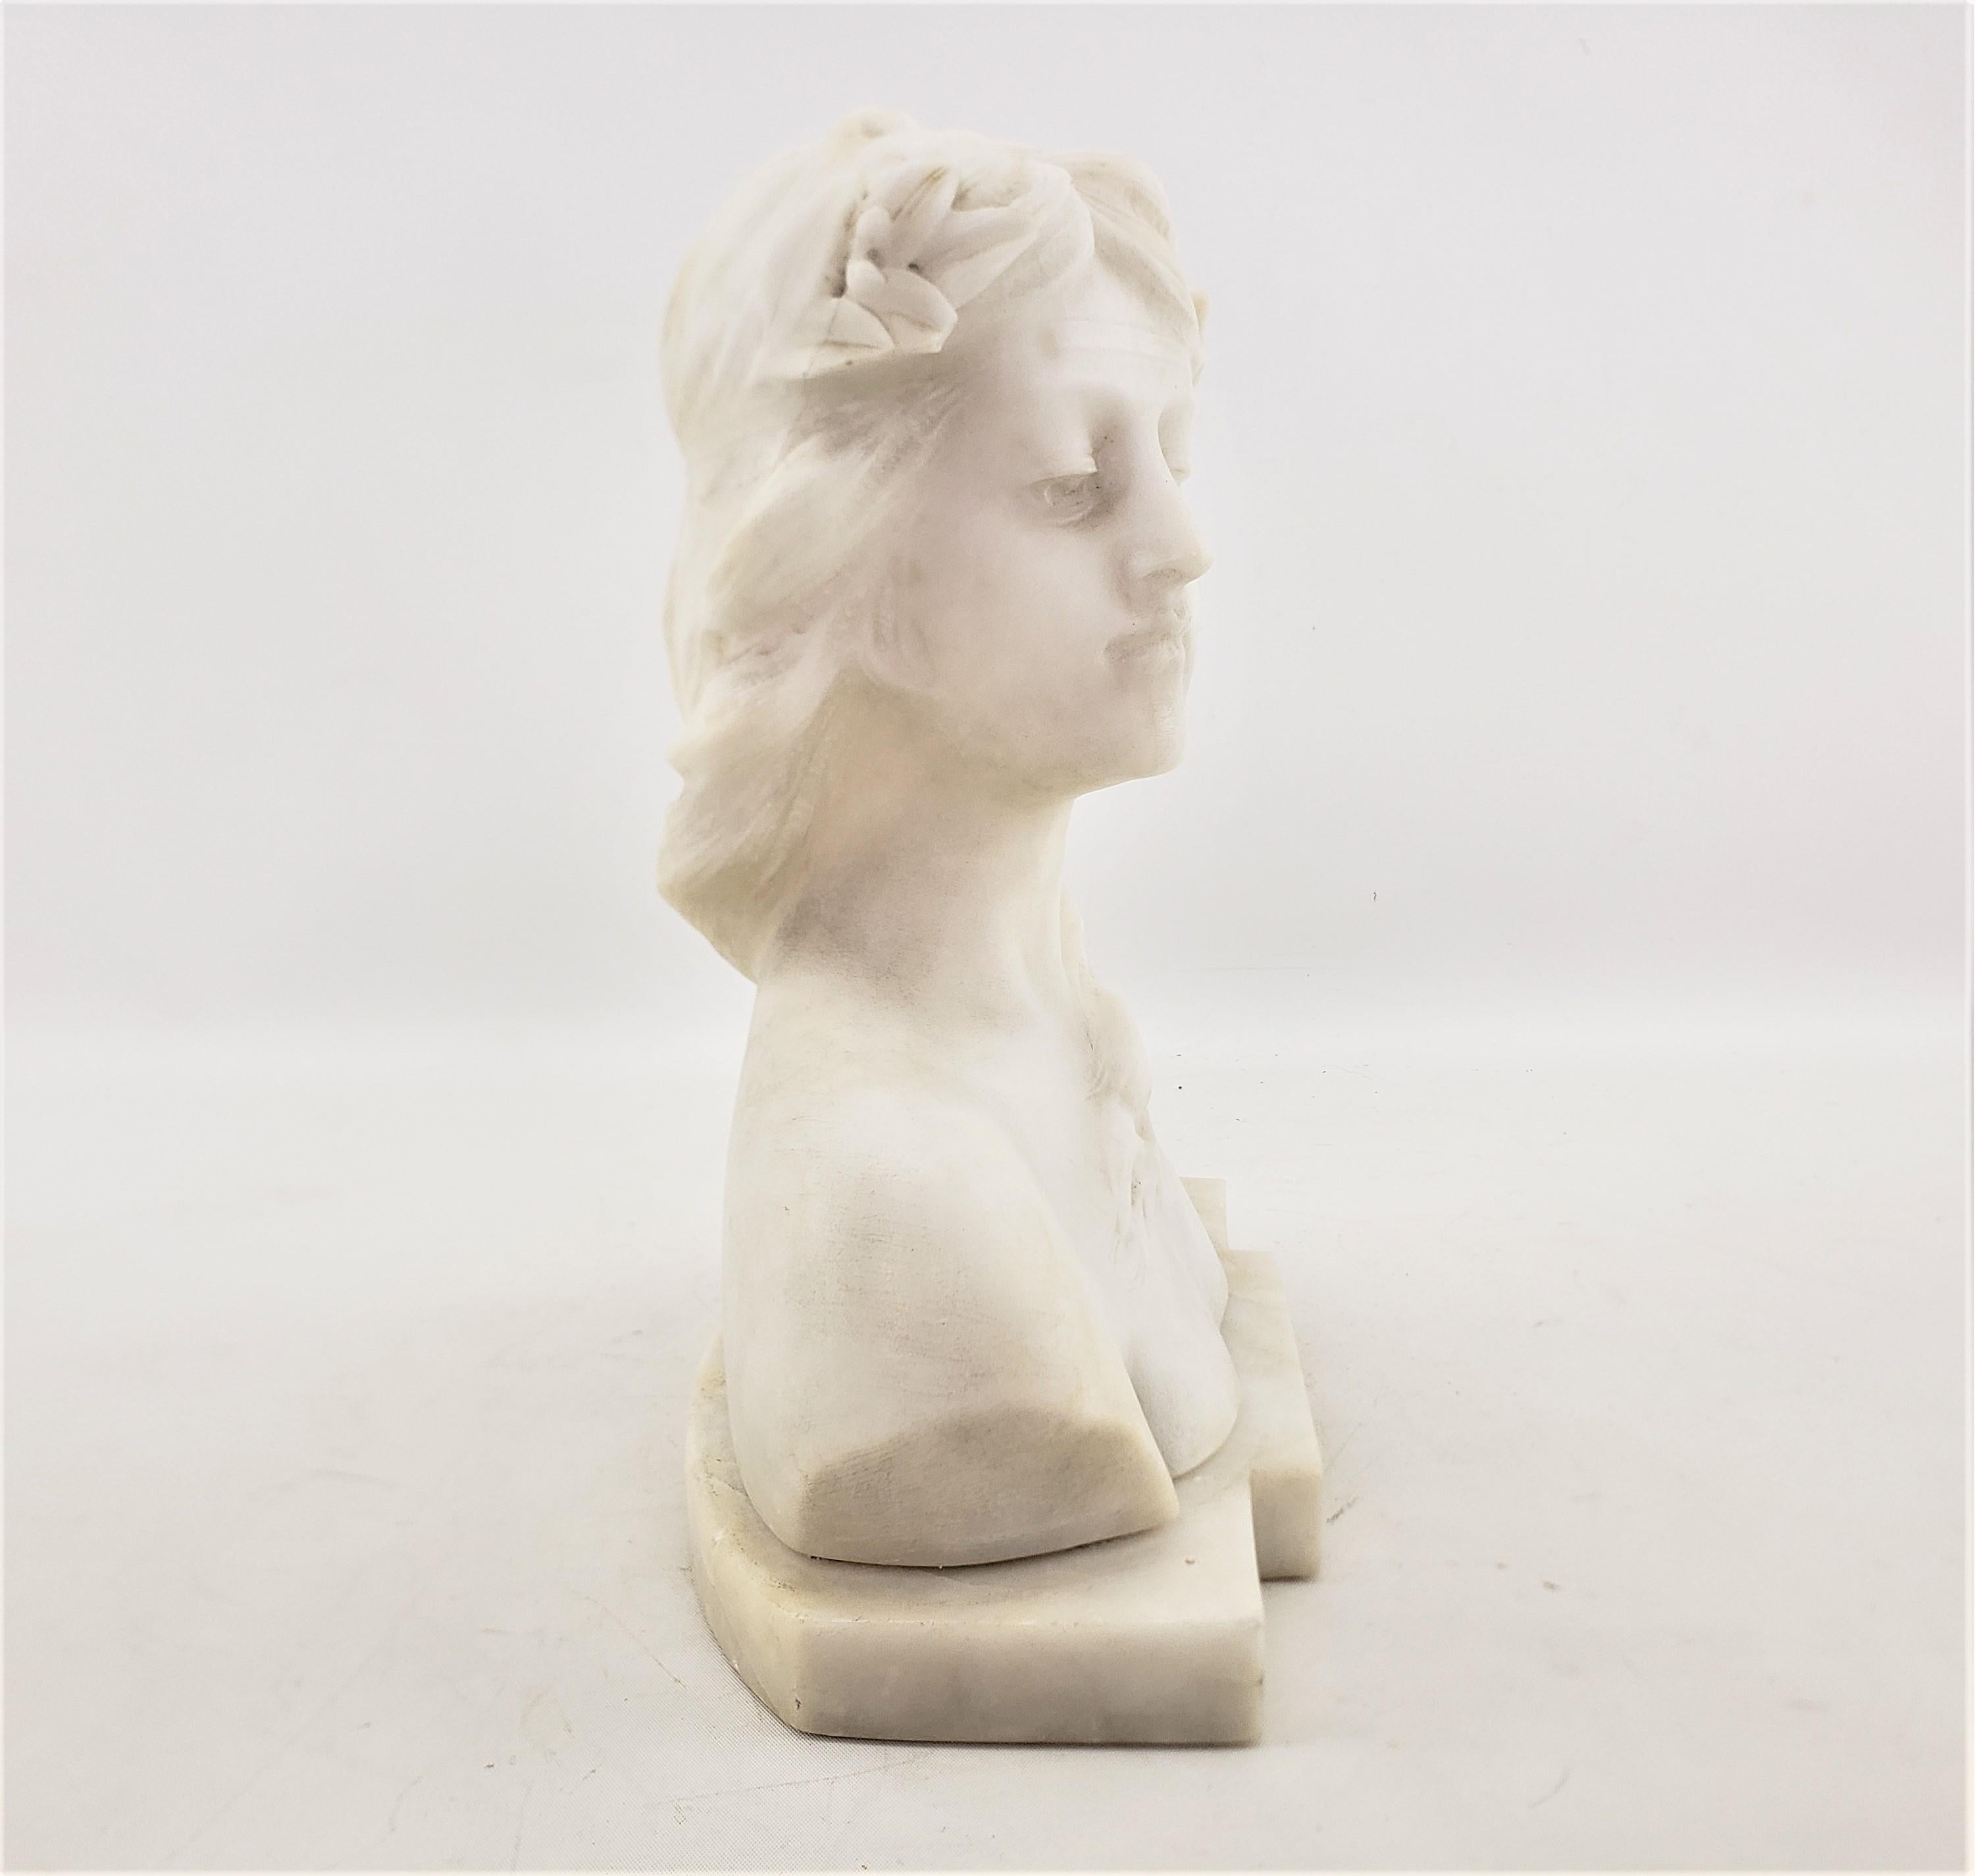 Renaissance Revival E. Zocchi Signed Antique White Marble Bust or Sculpture of a Young Female 